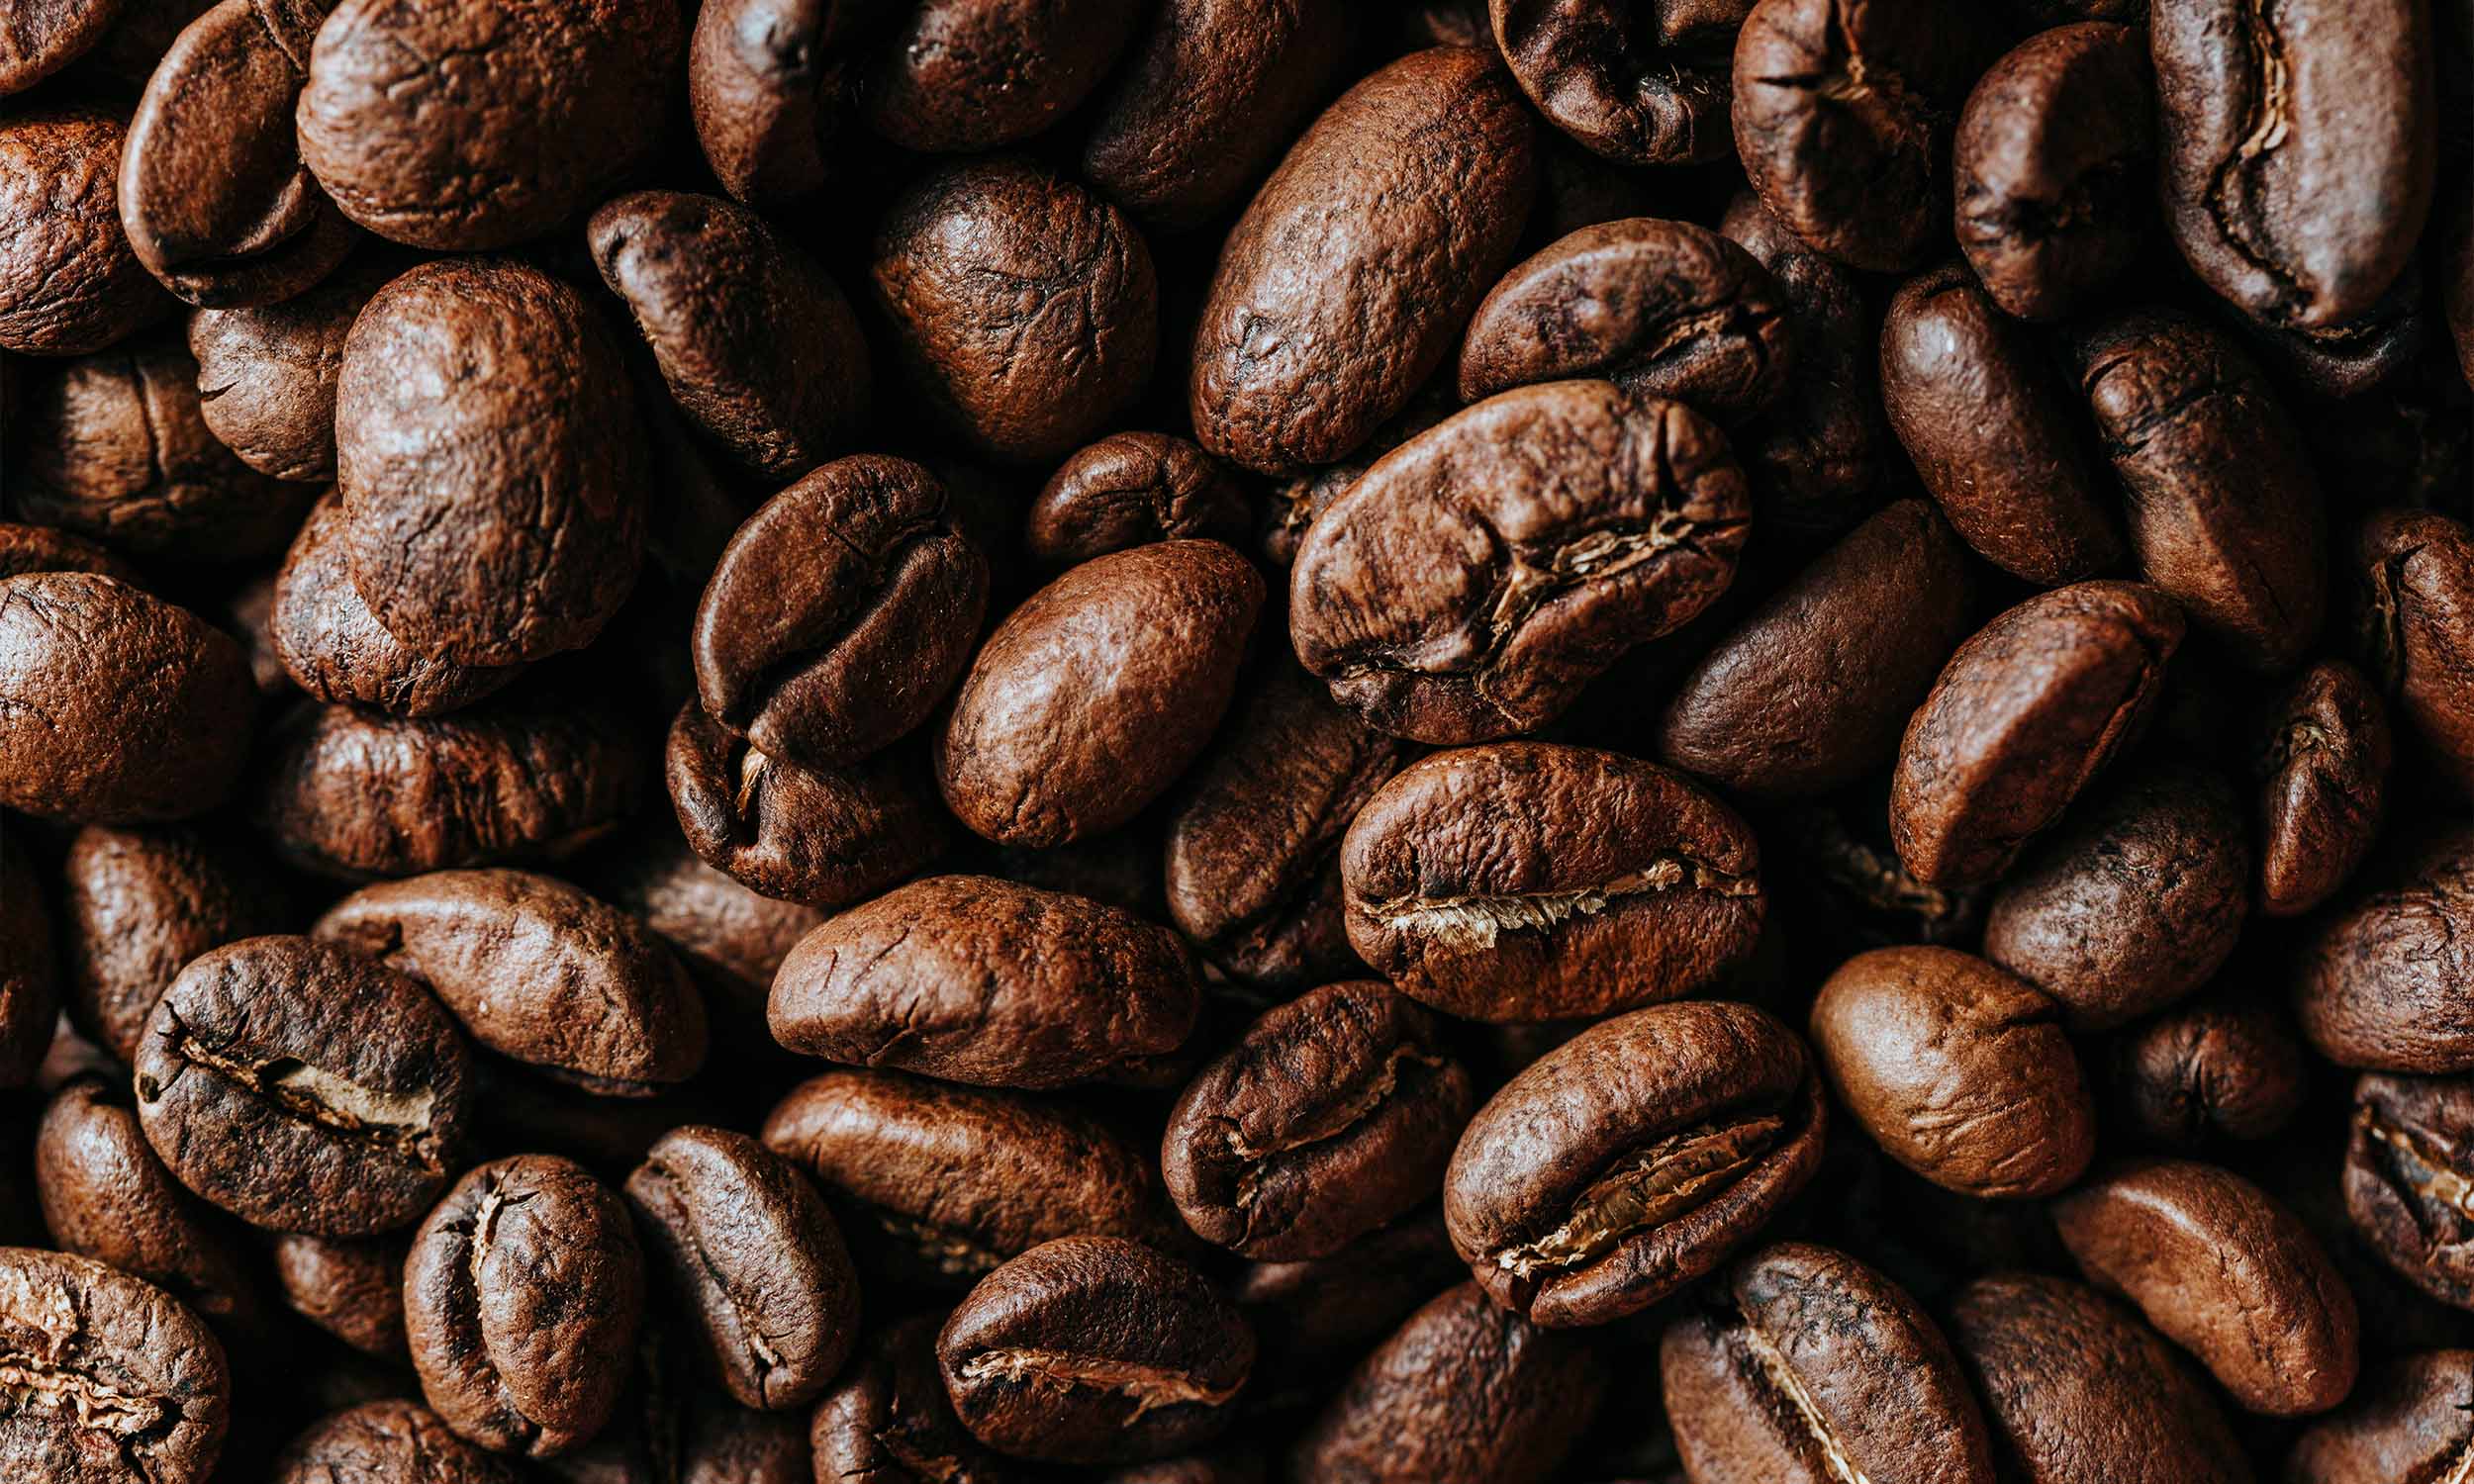 Close up image of coffee beans.